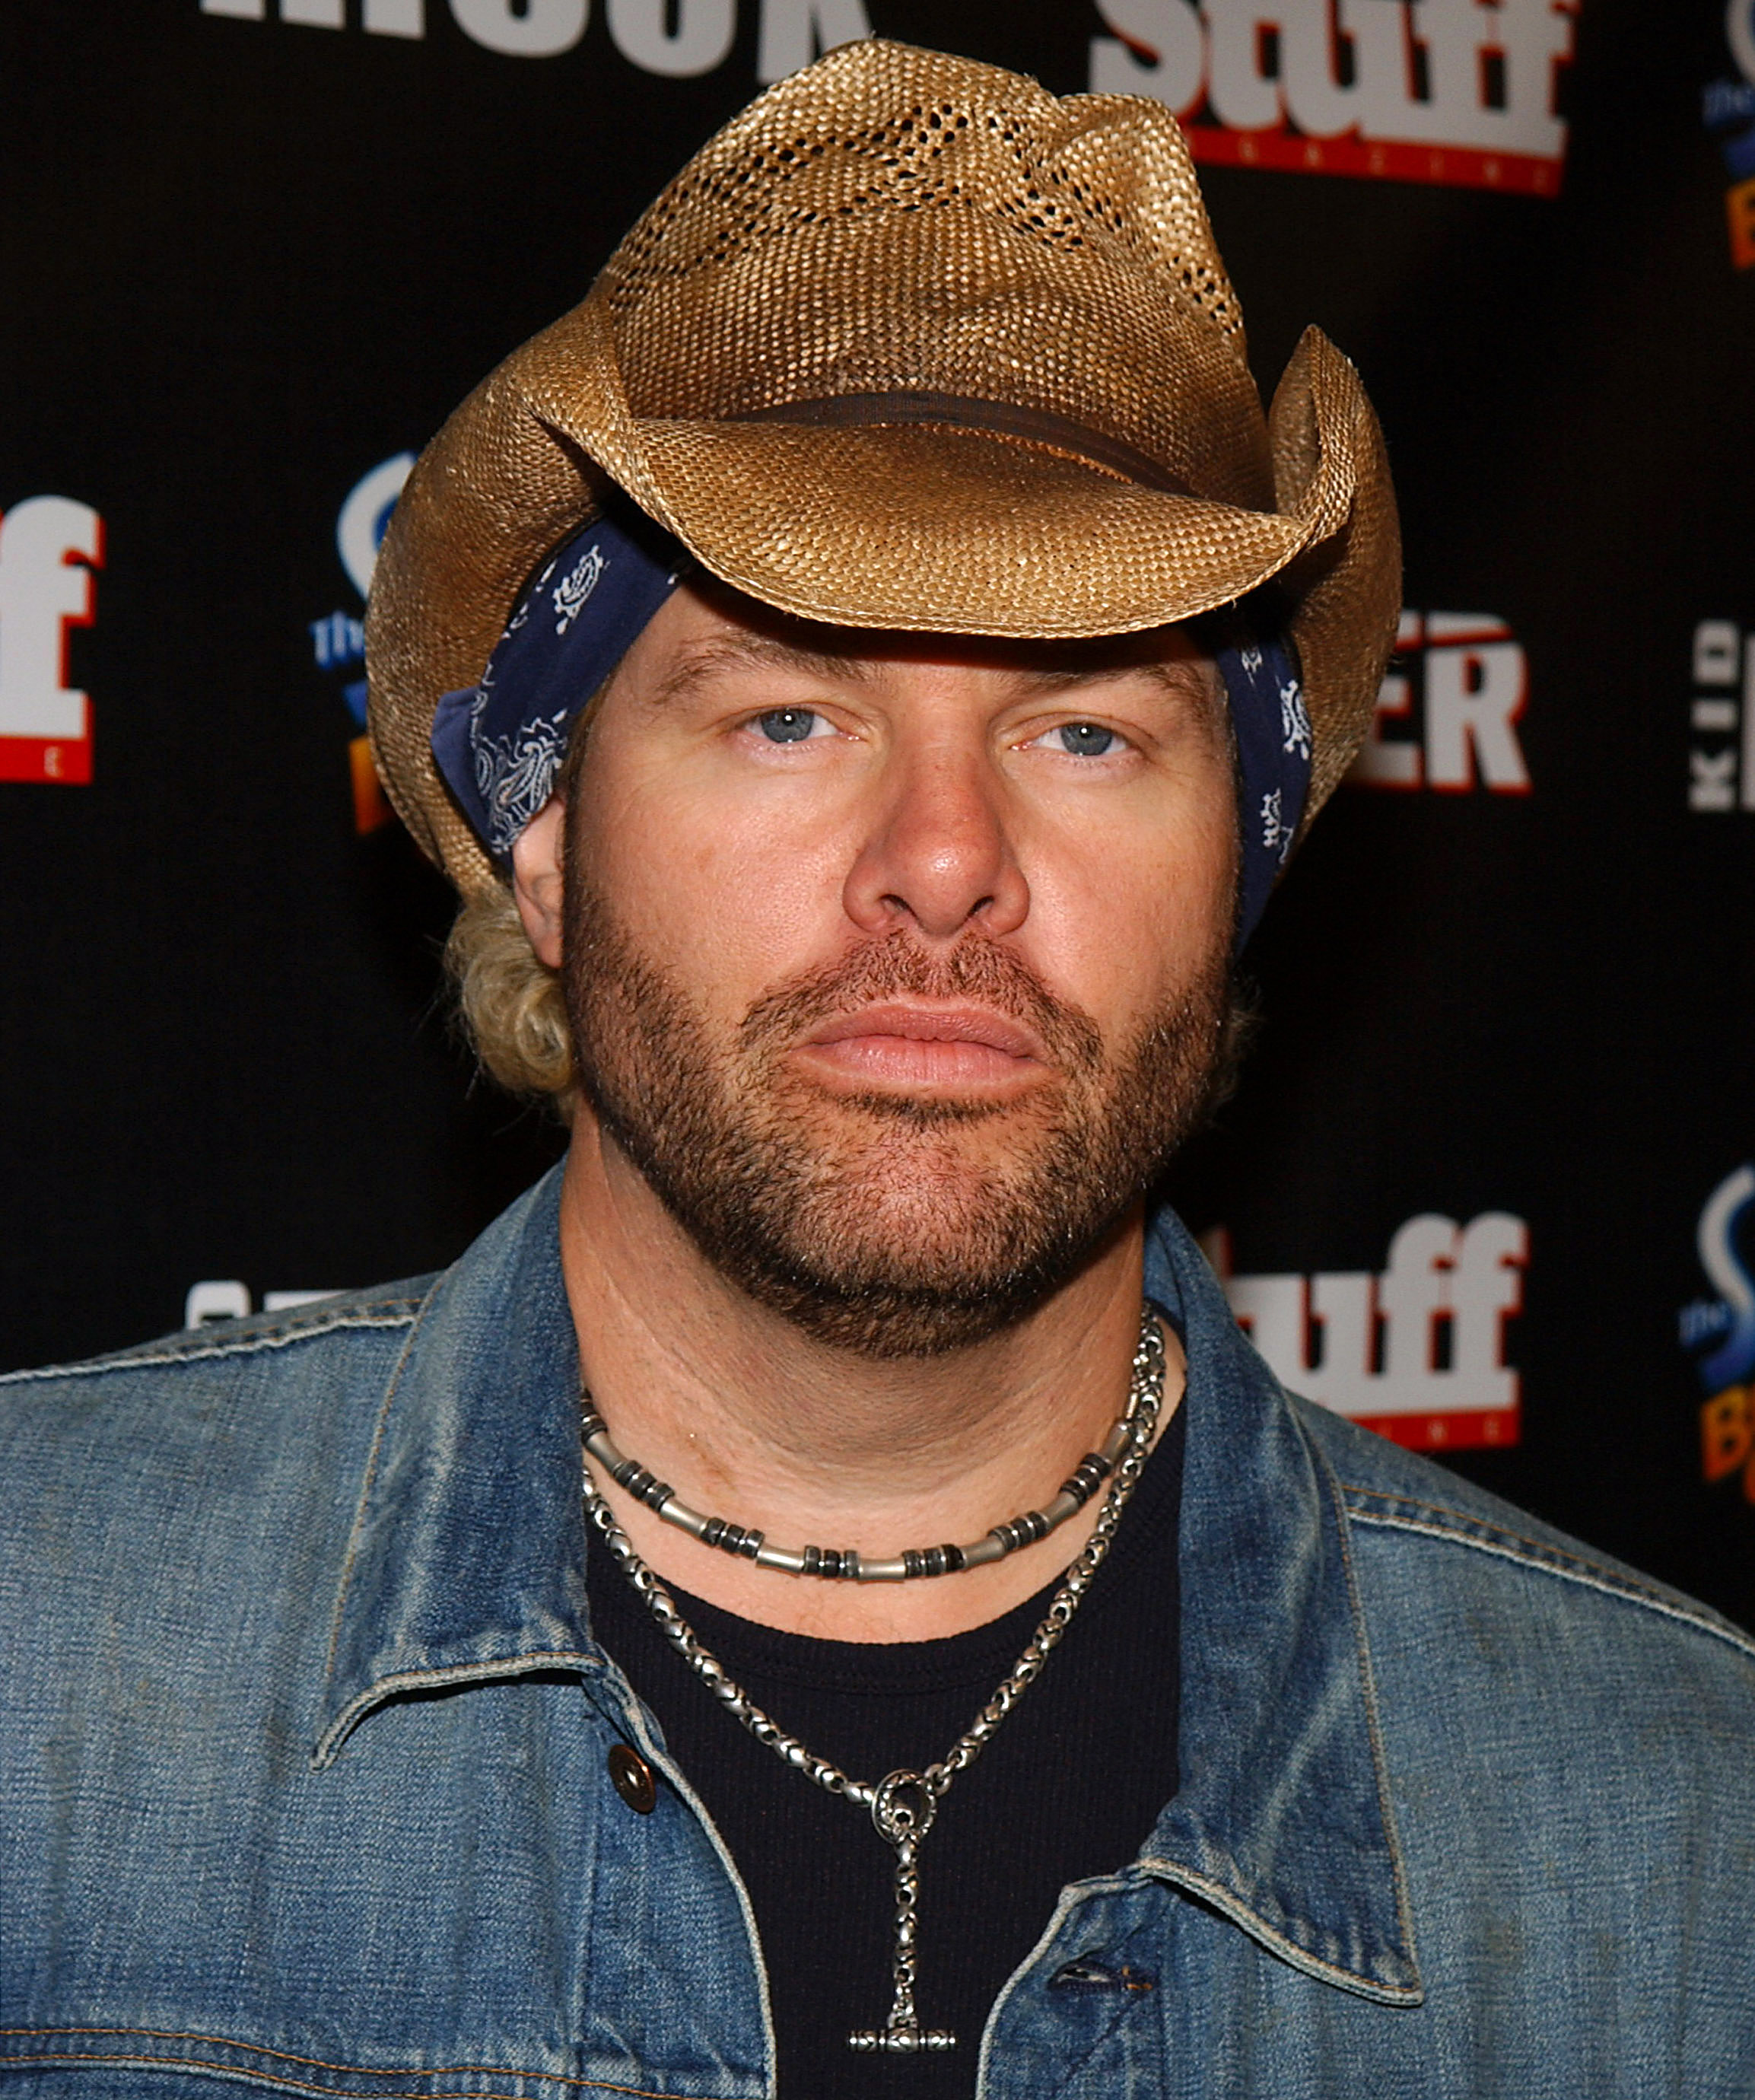 Toby Keith in California in 2003 | Source: Getty Images